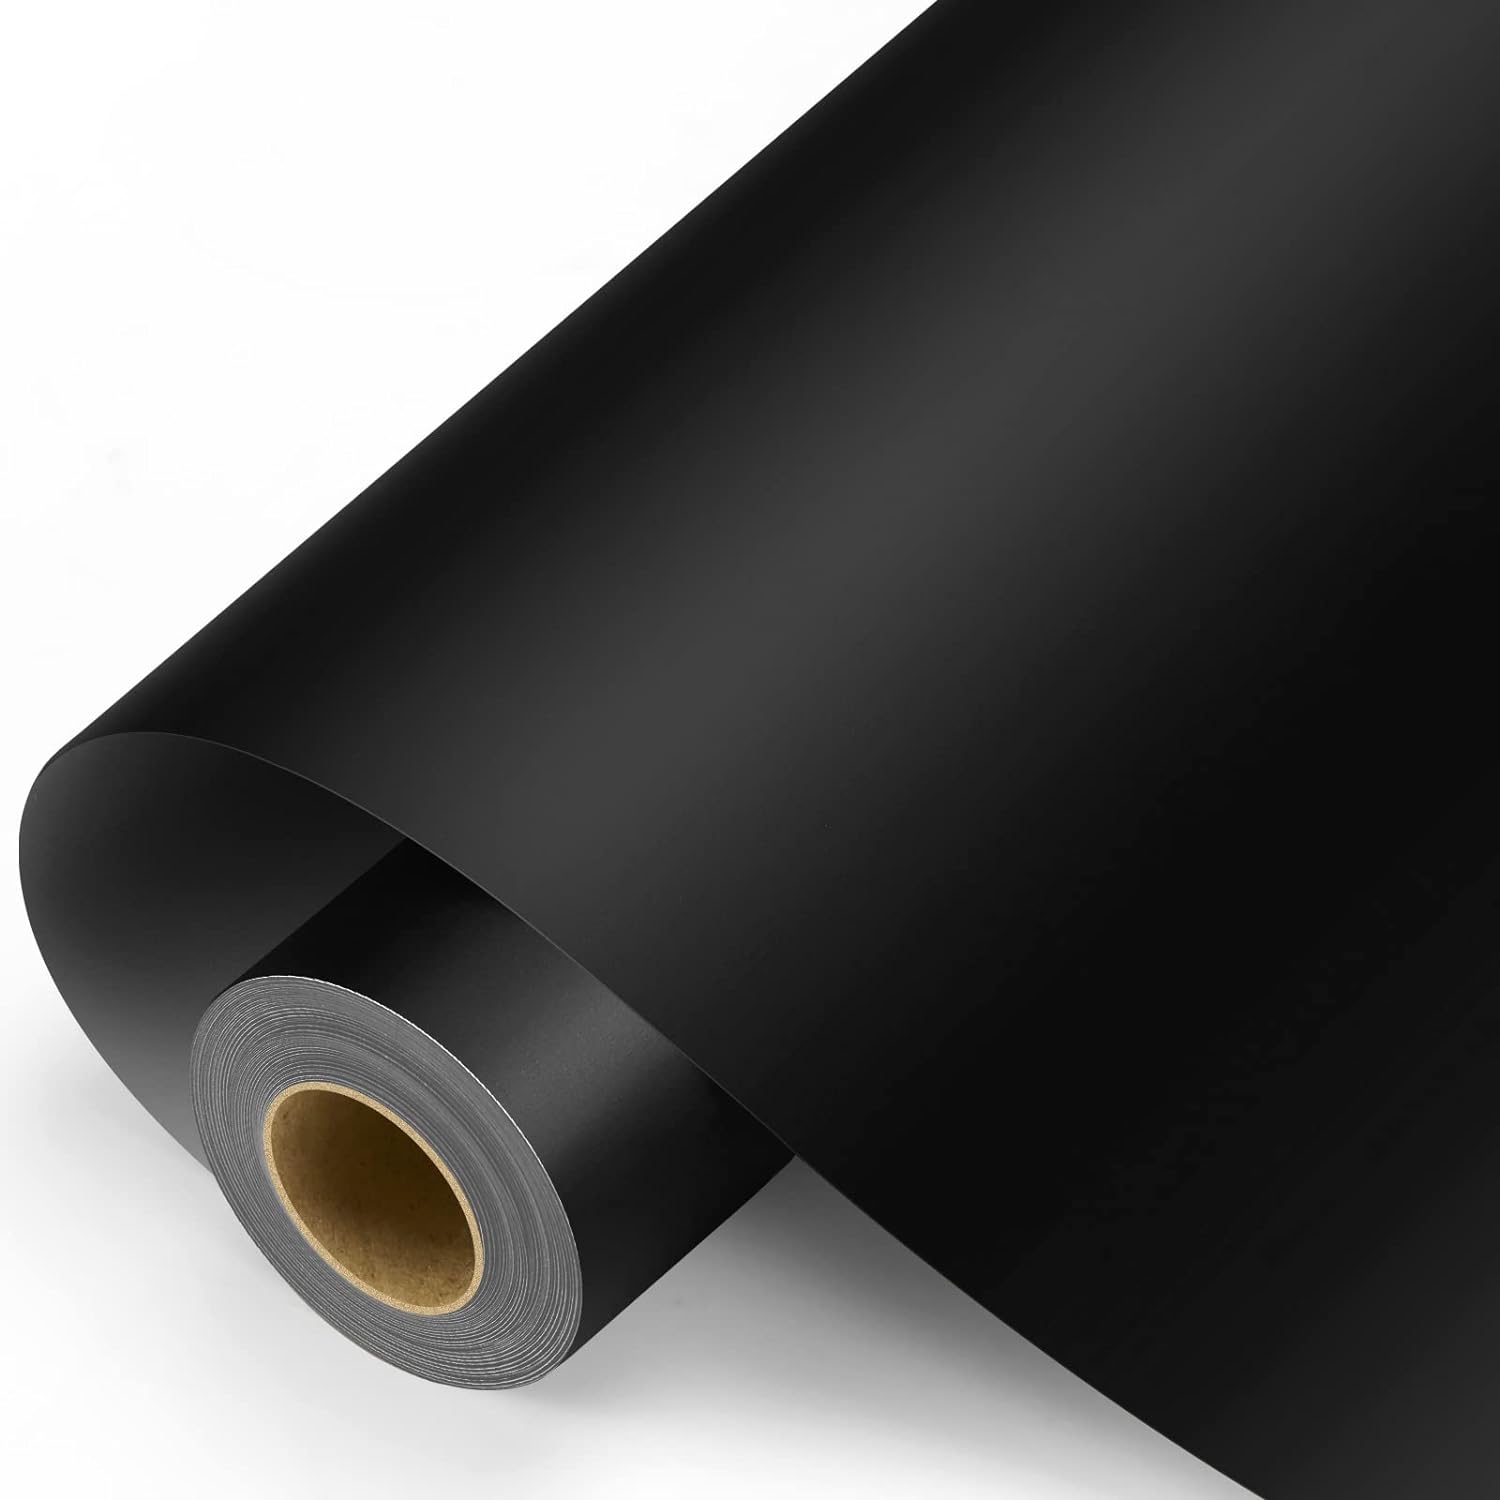 Matte Black Permanent Vinyl - 12x11FT Black Adhesive Vinyl Roll for All Cutting Machine, Permanent Outdoor Vinyl for Decor Sticker, Car Decal, Scrapbooking, Signs, Waterproof